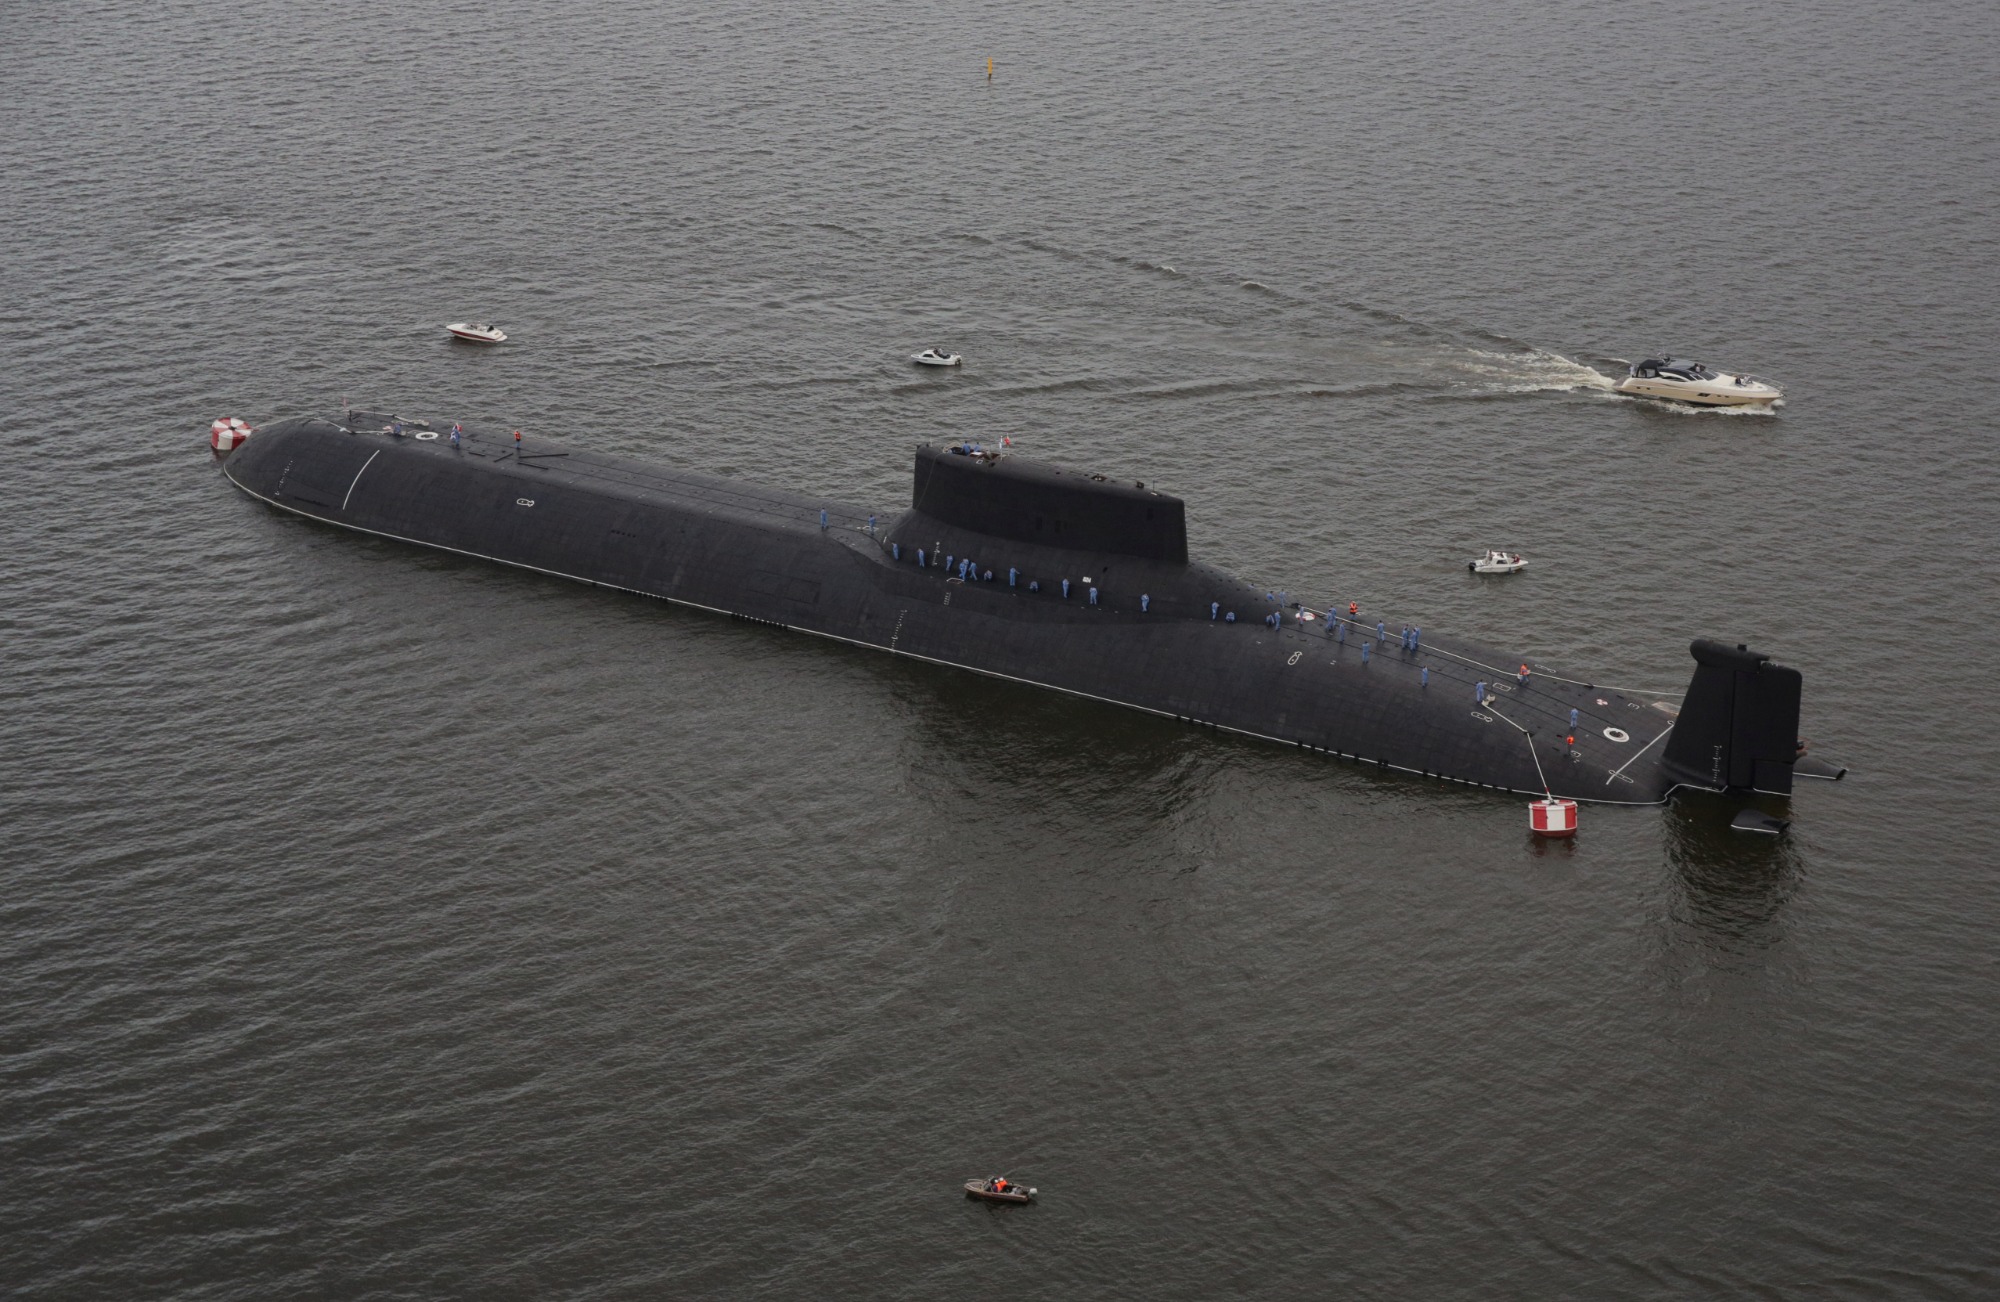 In 1985, A Nuclear Submarine Explosion Contaminated Russia's Far East